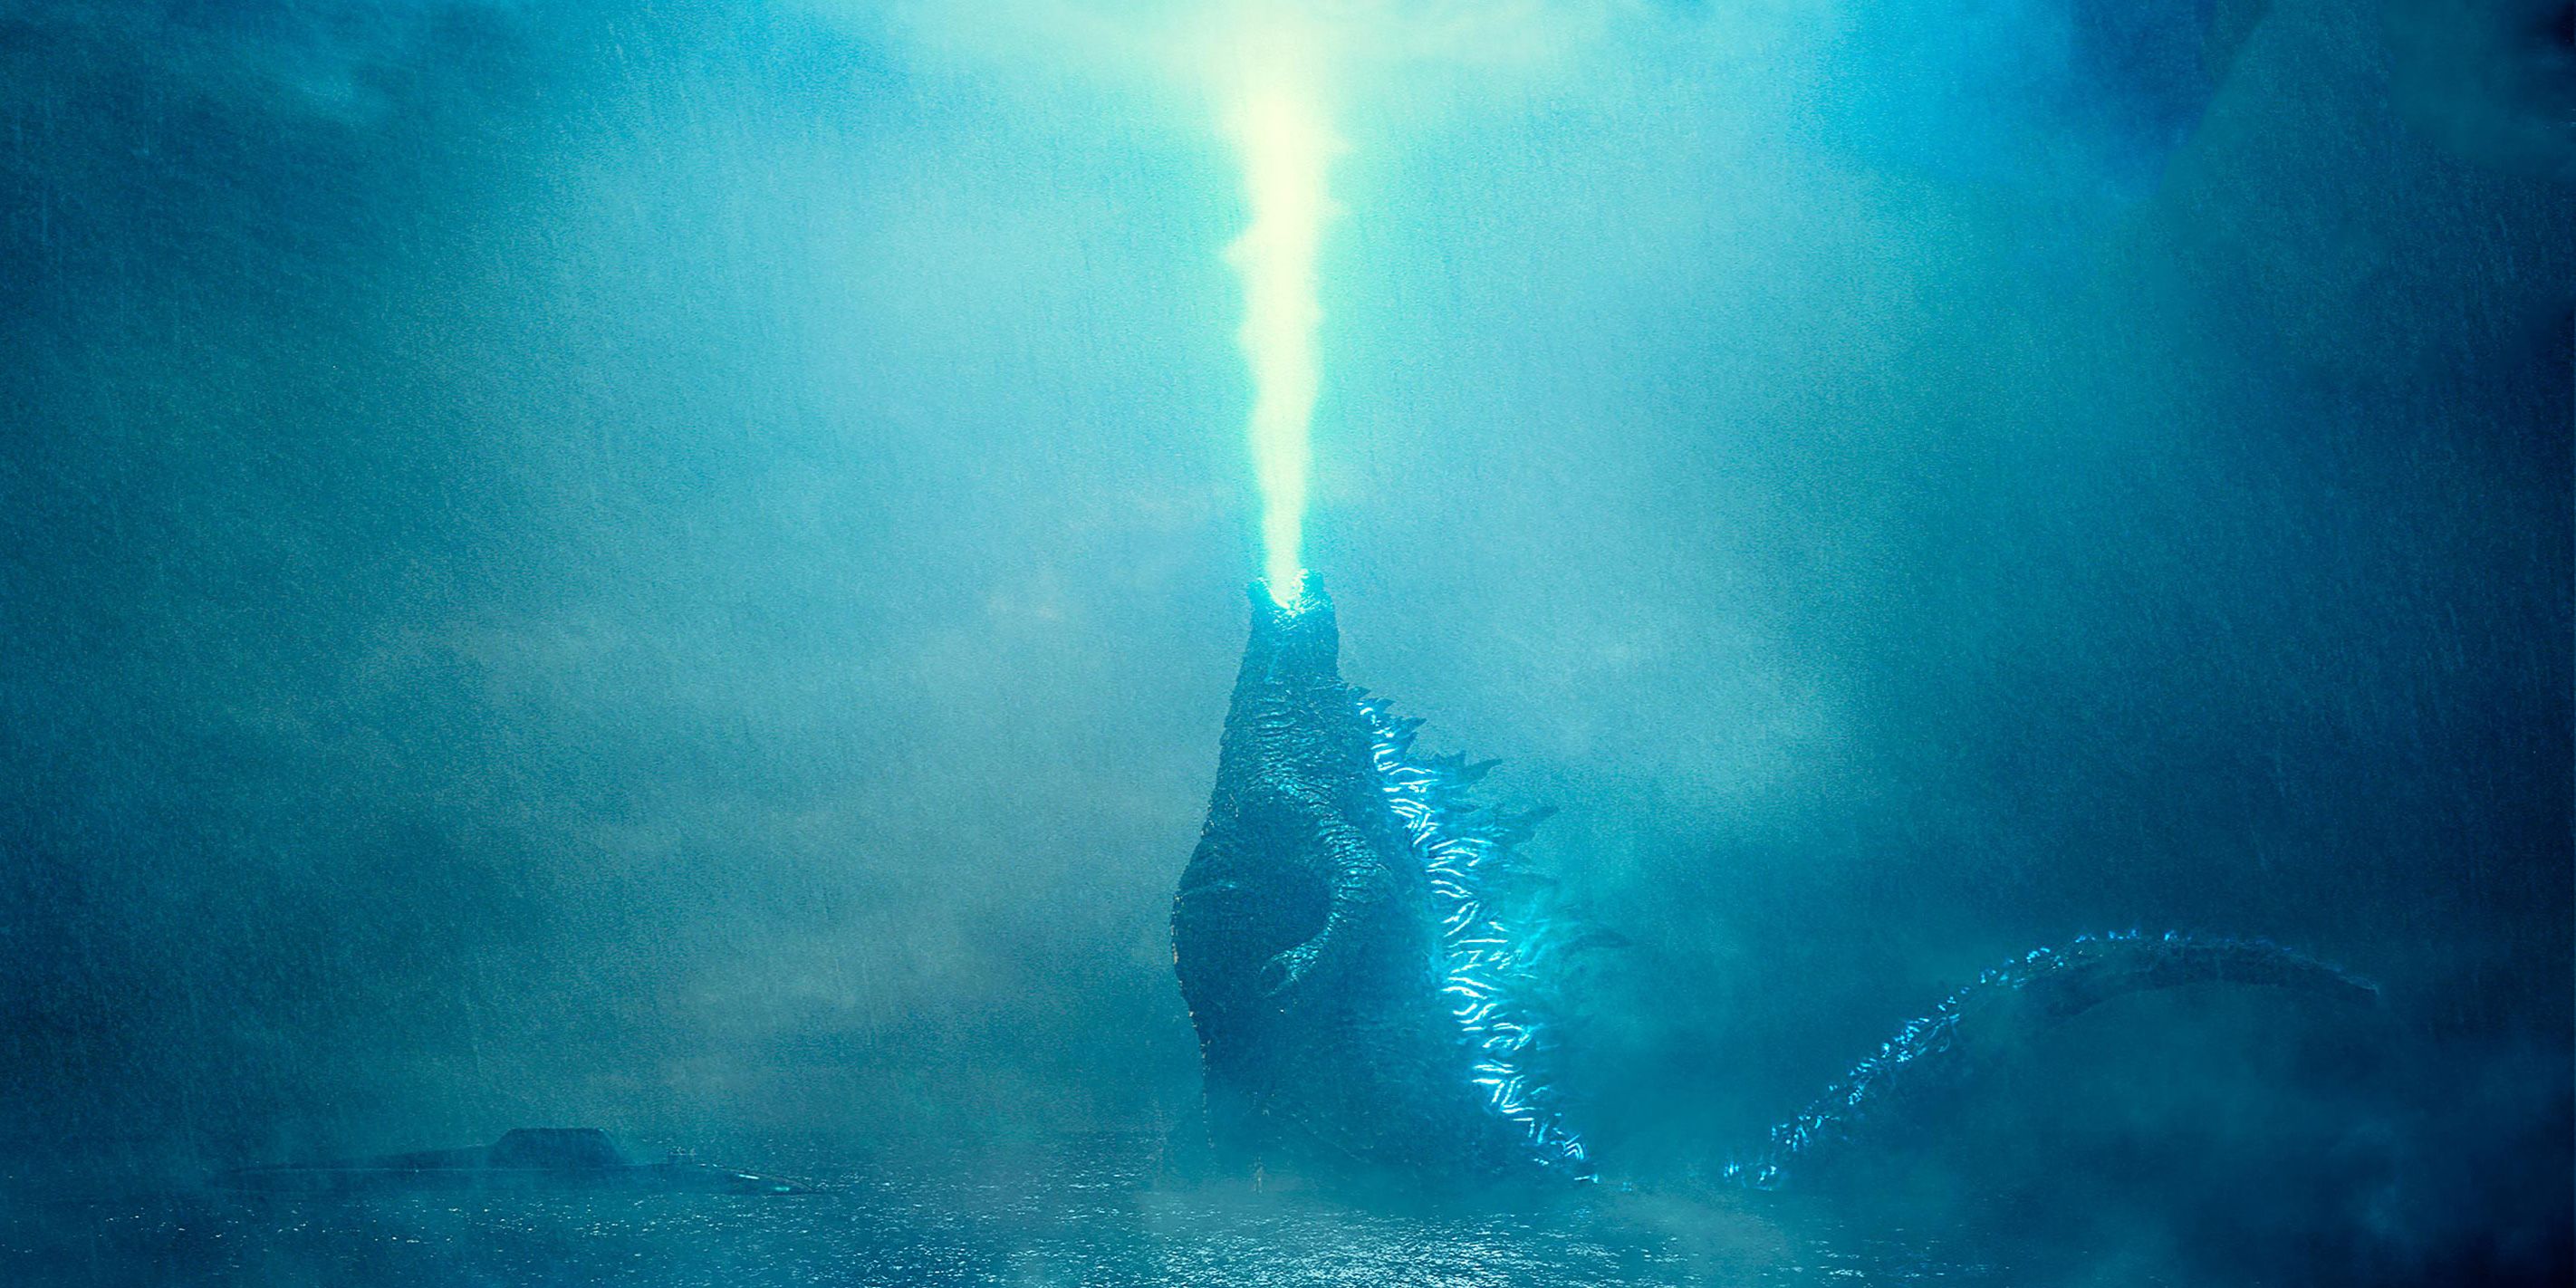 Godzilla shoots his atomic breath up into the sky in front of the submarine in Godzilla King of the Monsters